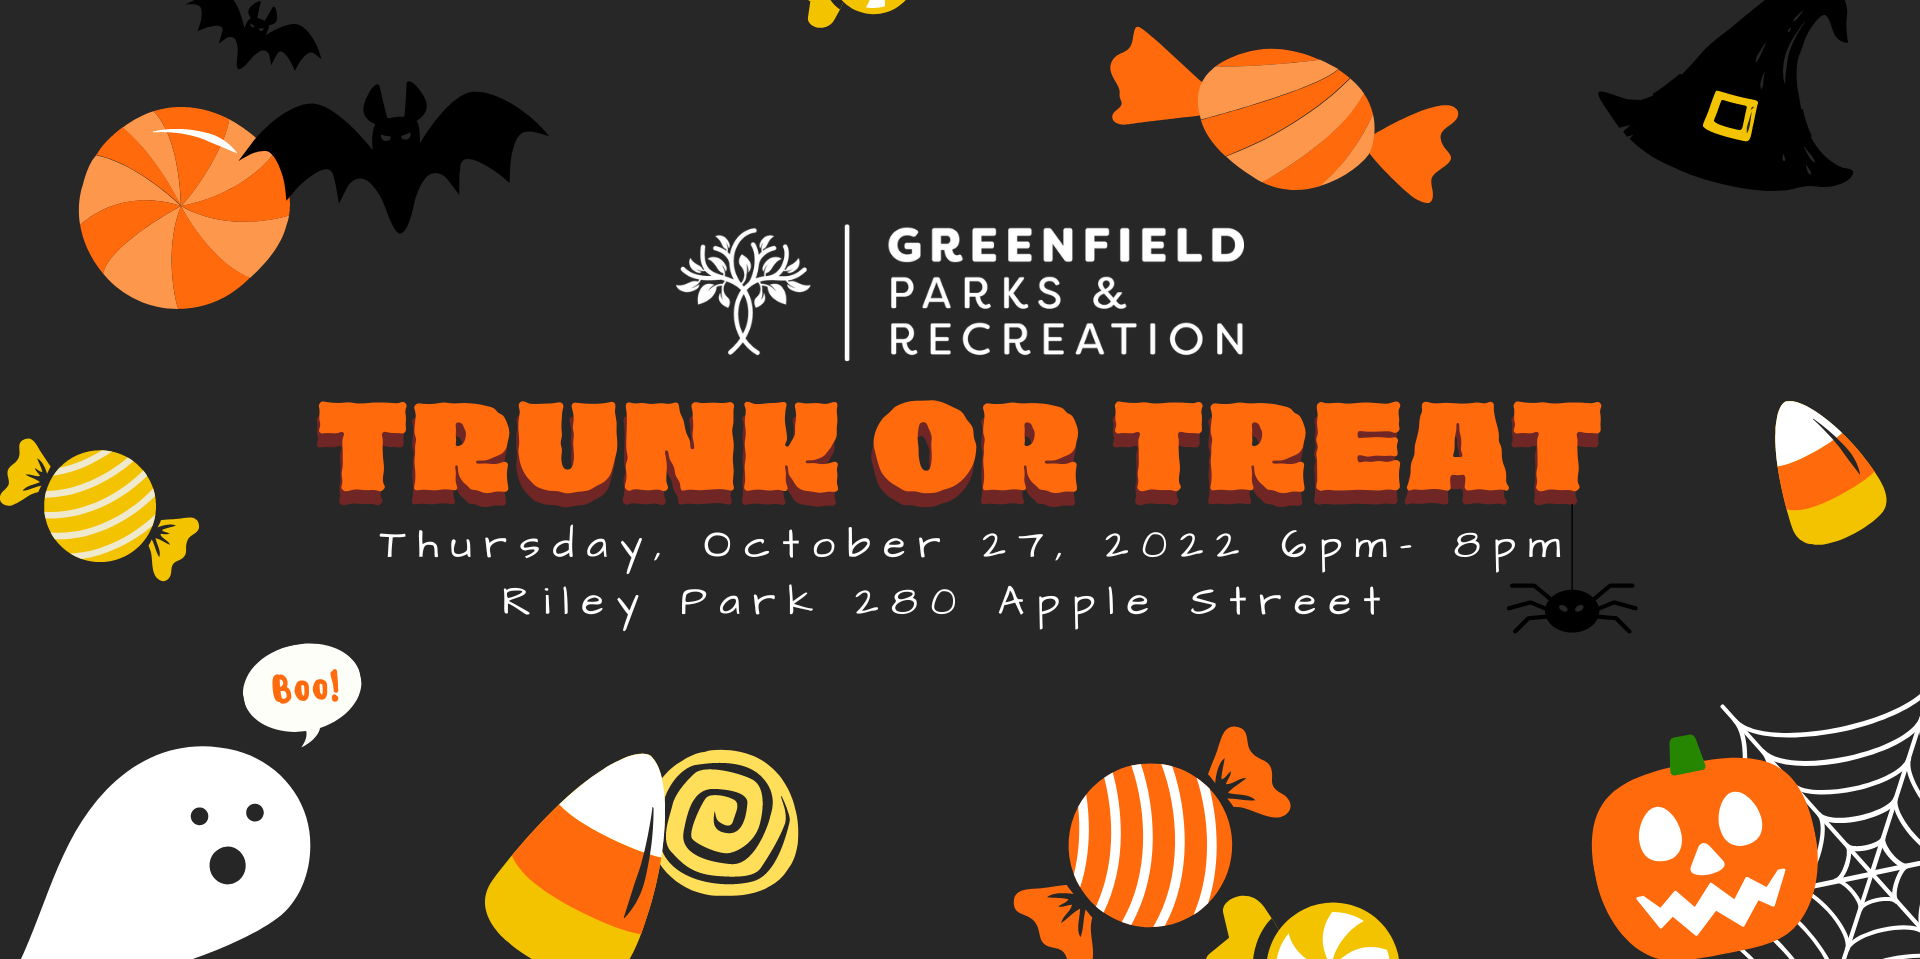 FREE TRUNK OR TREAT 2022 promotional image